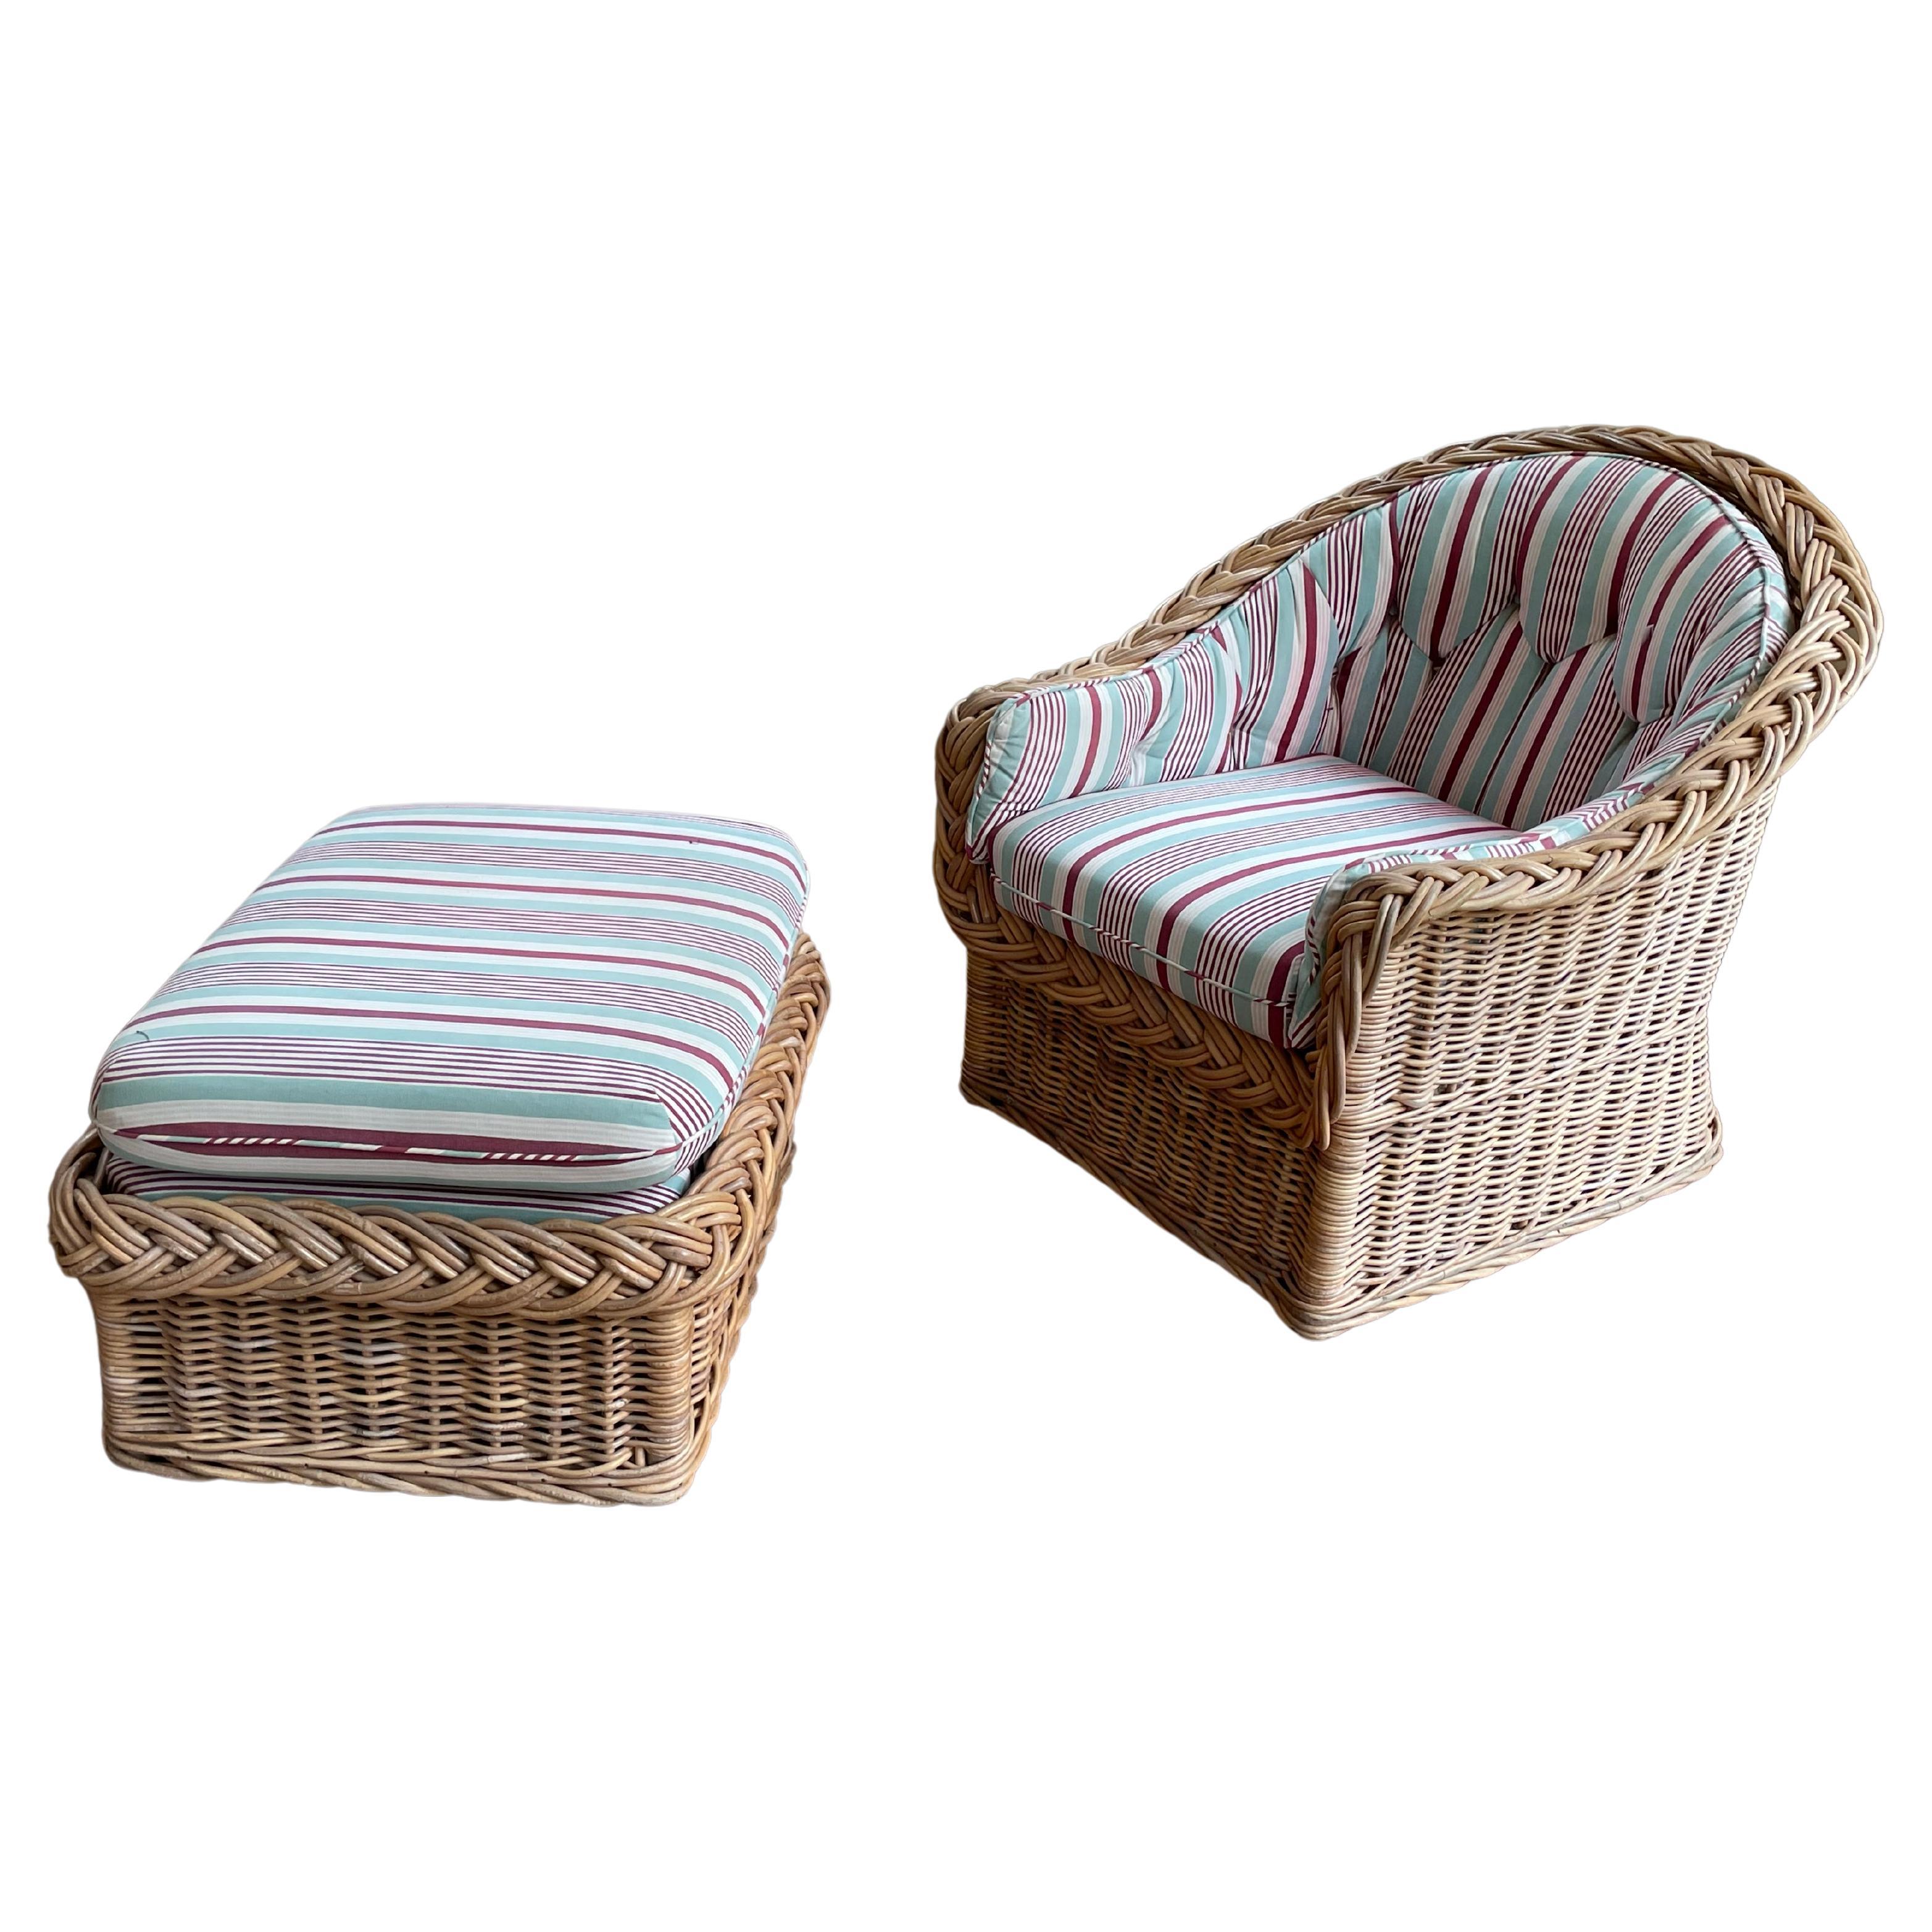 Woven and braided Italian rattan barrel back lounge chair and matching ottoman from The Wicker Works San Francisco CA By Peter Rocchia 